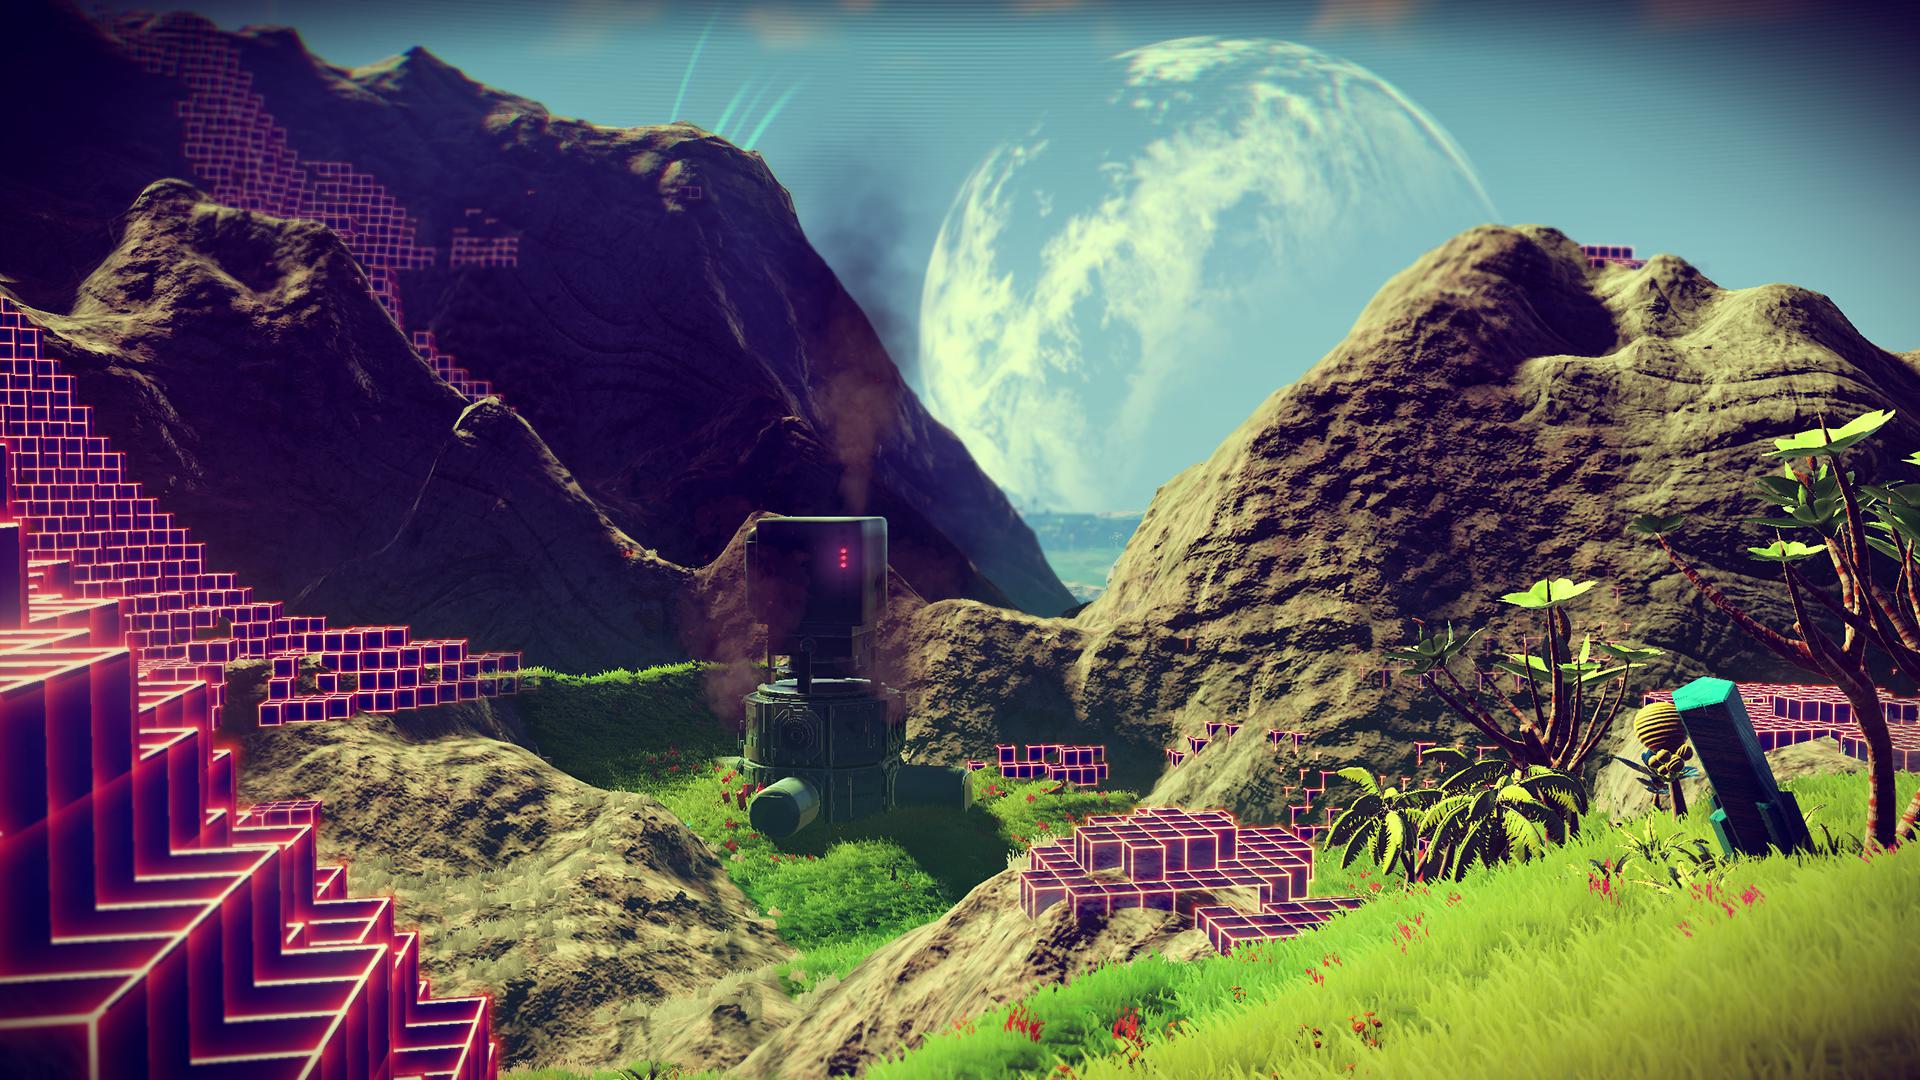 No Man’s Sky “Path Finder” Update Coming This Week